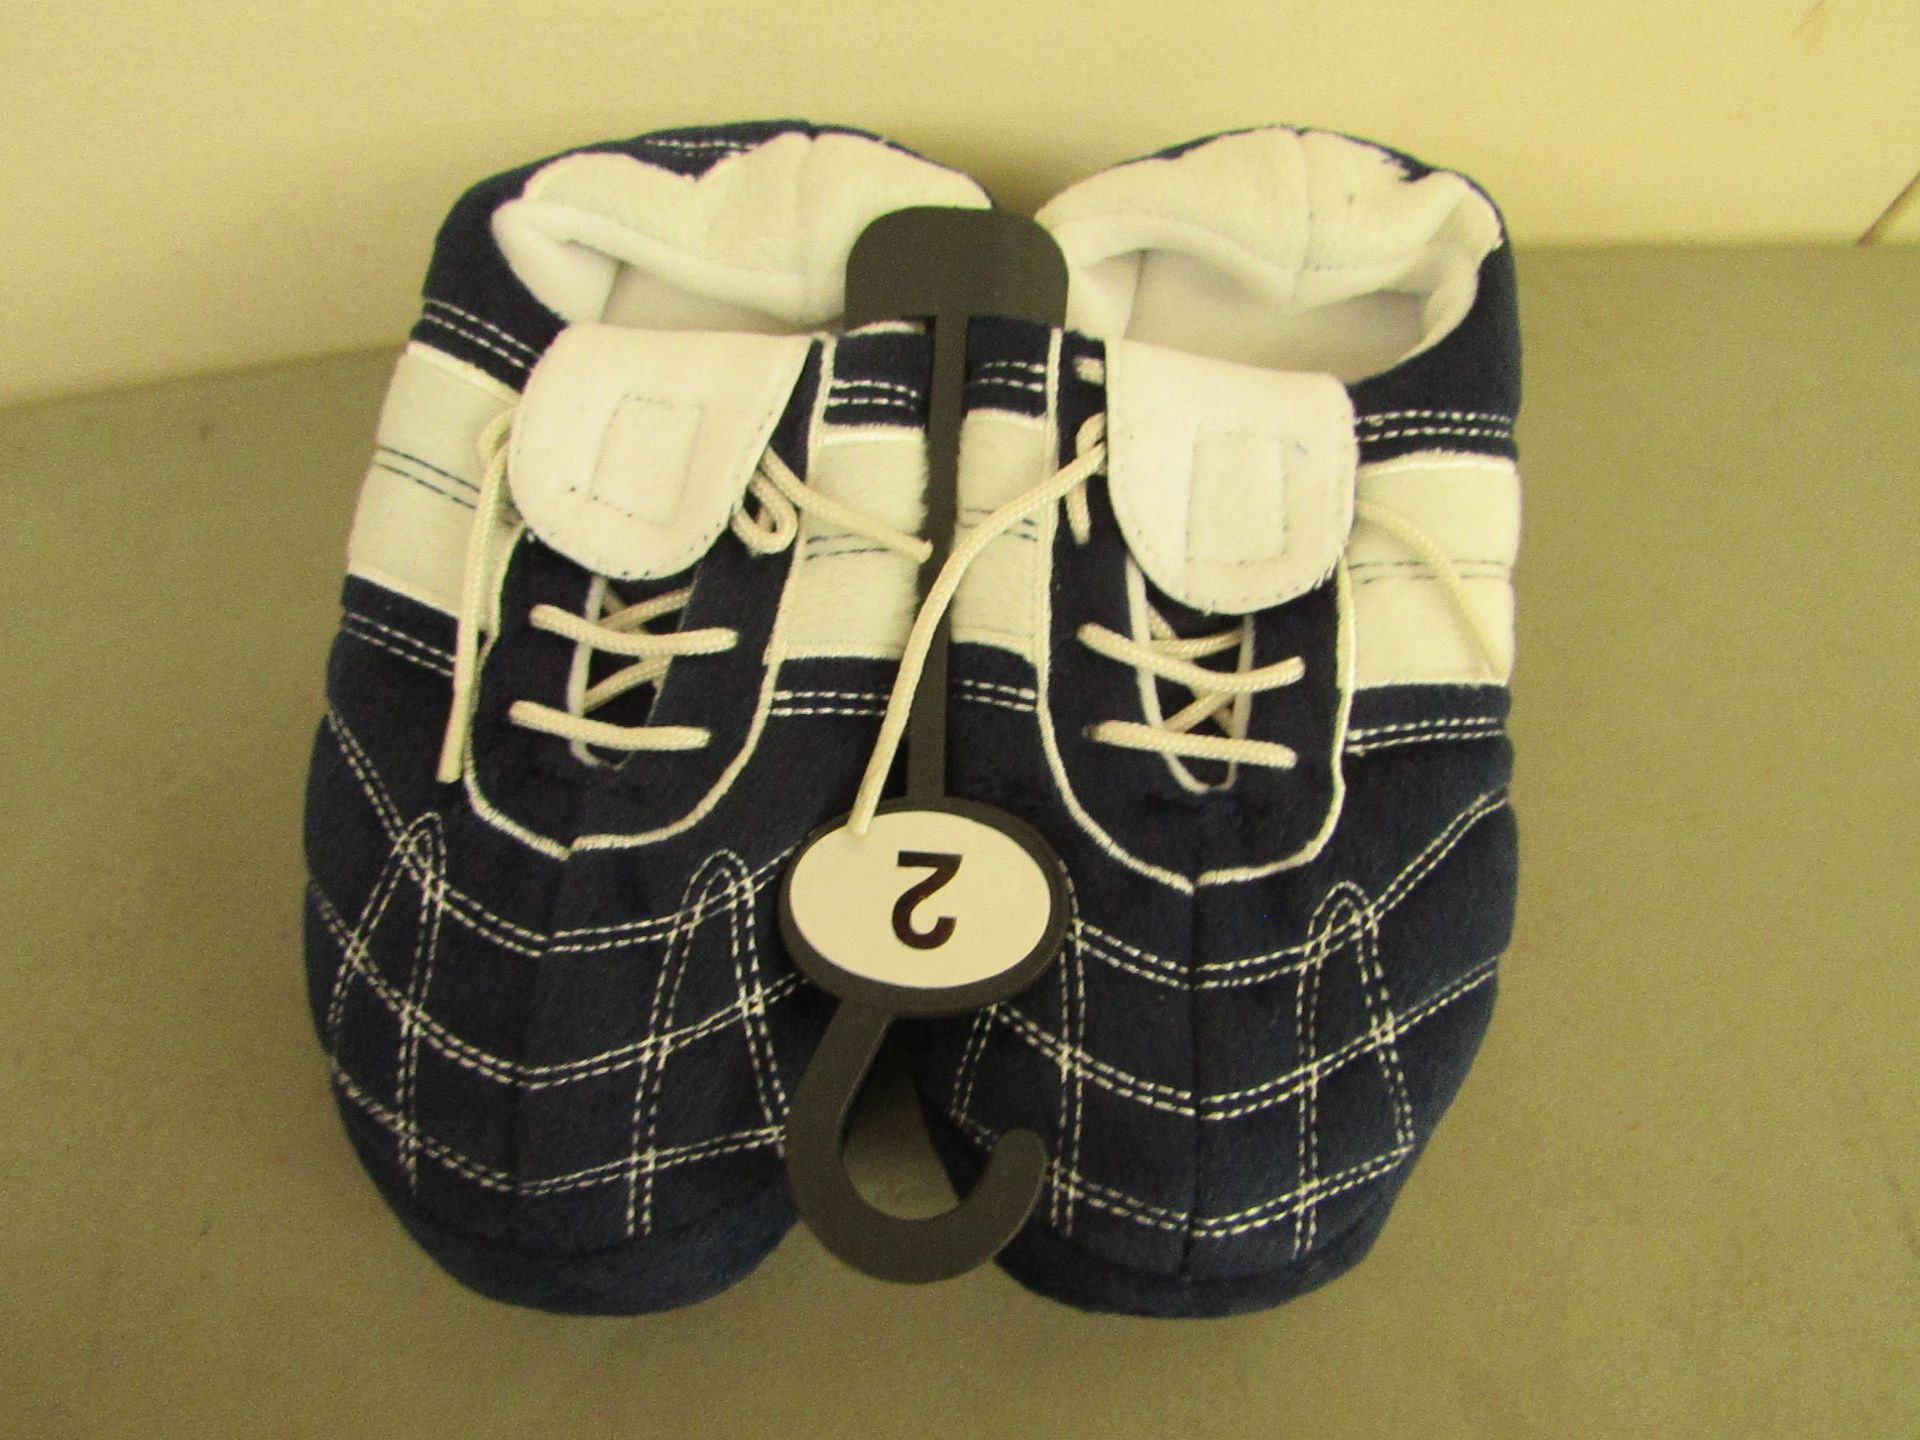 6 X Football Themed Slippers  blue/white all size 2 new in packaging